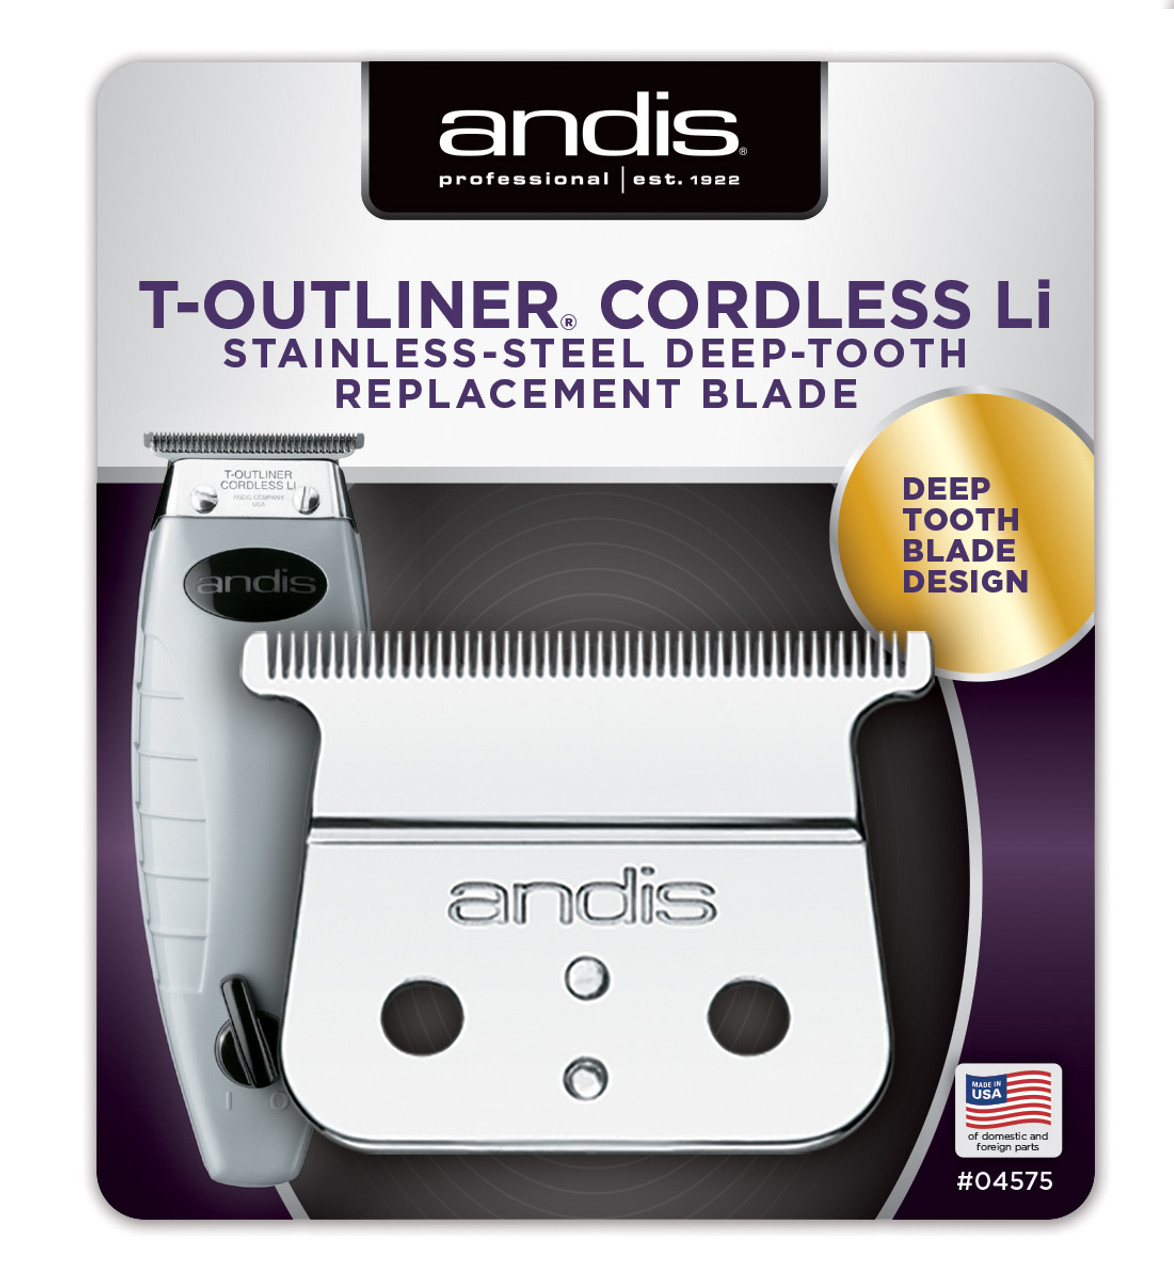 Andis T-Outliner Cordless Blade Deep Tooth - Stainless Steel